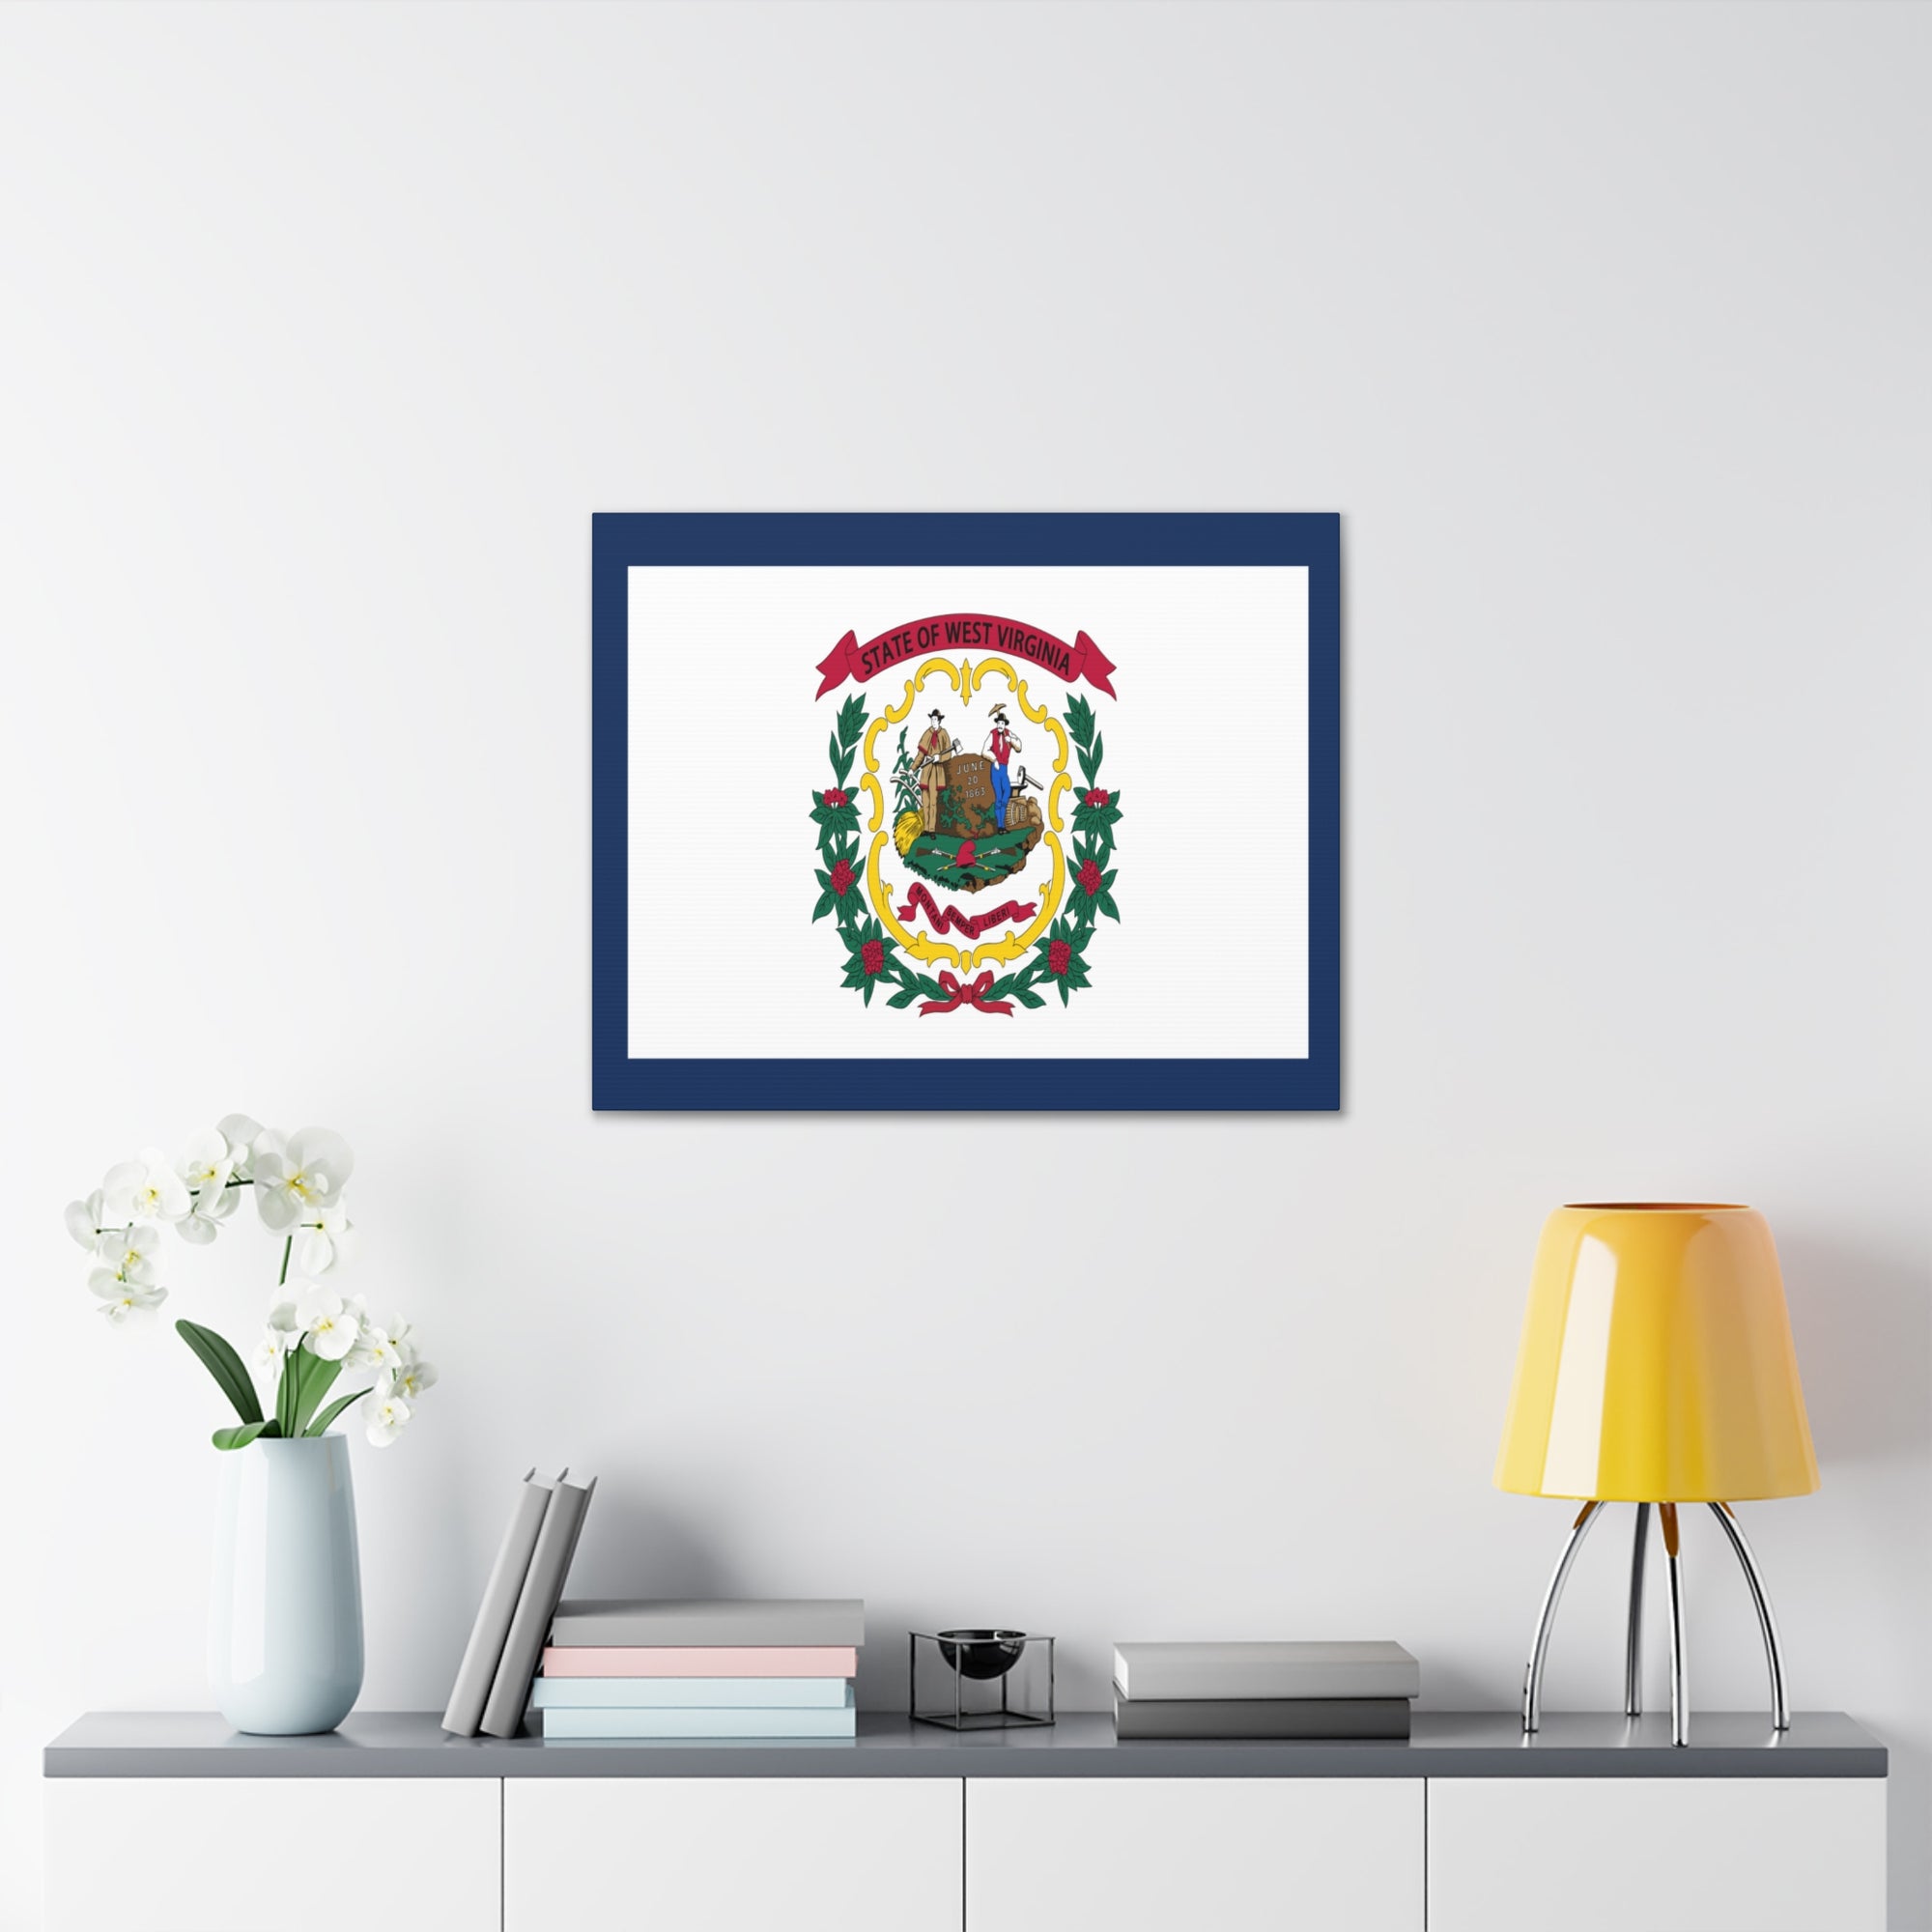 West Virginia Stage Flag Canvas Vibrant Wall Art Unframed Home Decor-Express Your Love Gifts